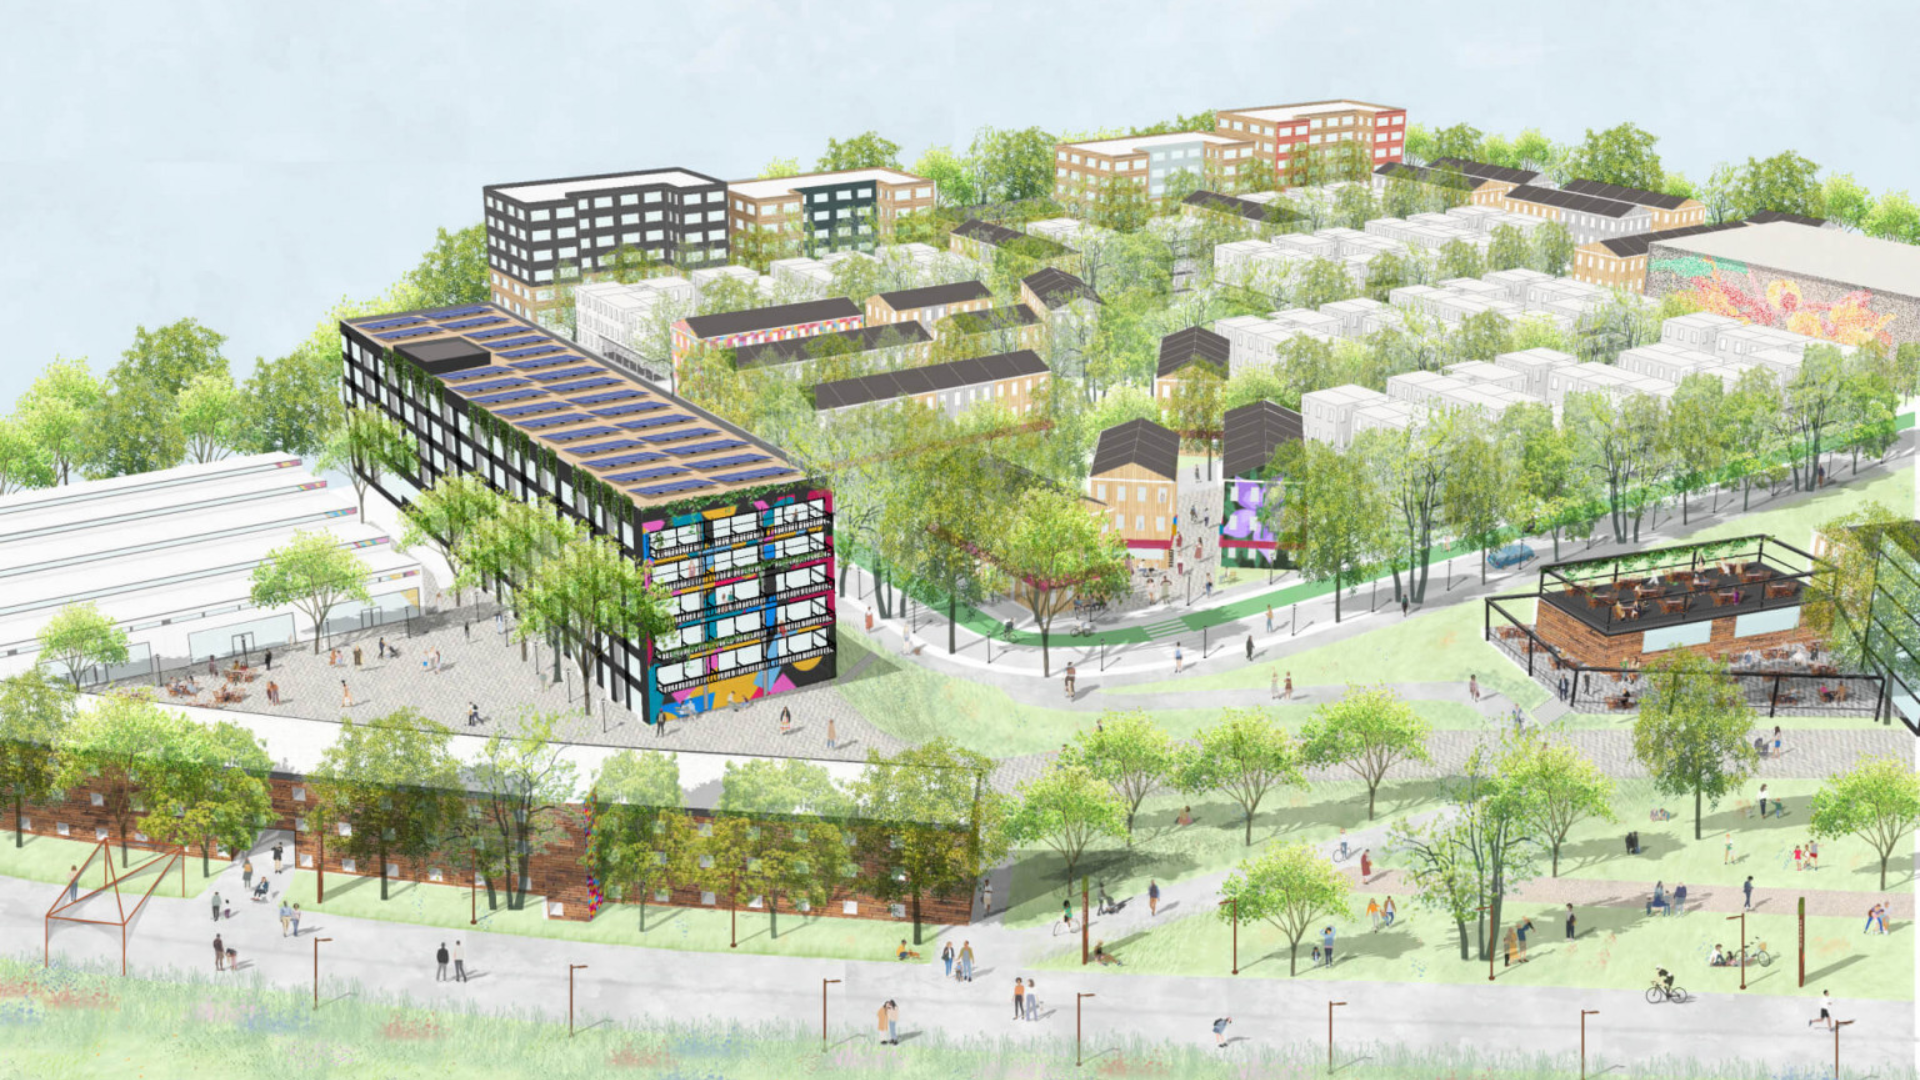 An artist's rendering of the proposed development showcasing the future design and layout.